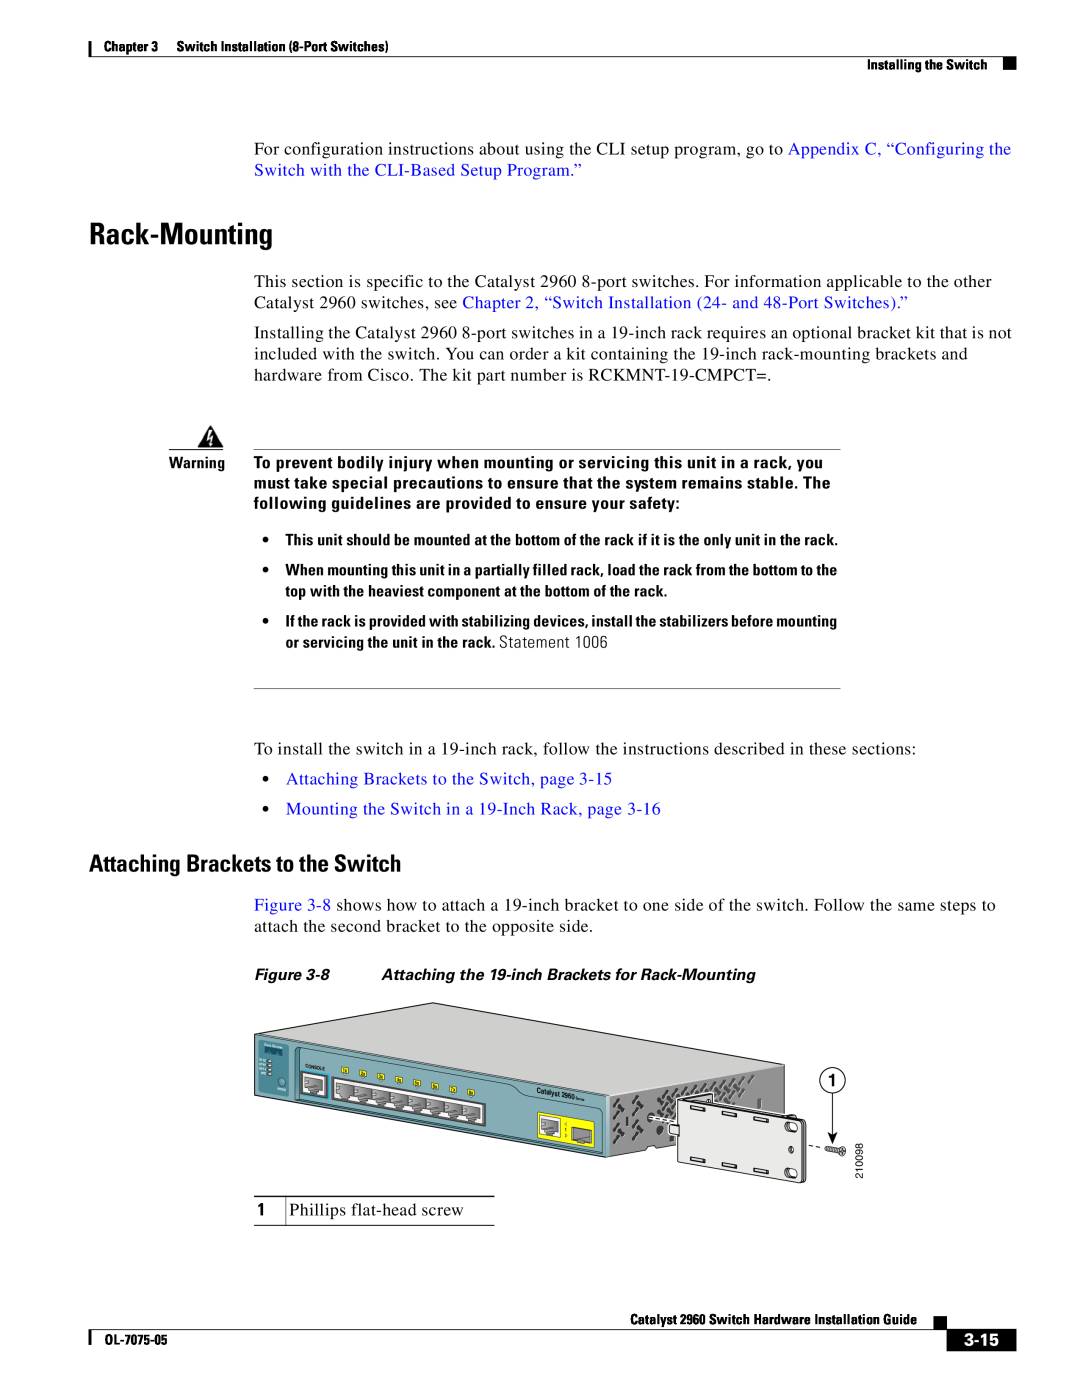 Cisco Systems 2960 Attaching Brackets to the Switch, page, Mounting the Switch in a 19-Inch Rack, page, 3-15 